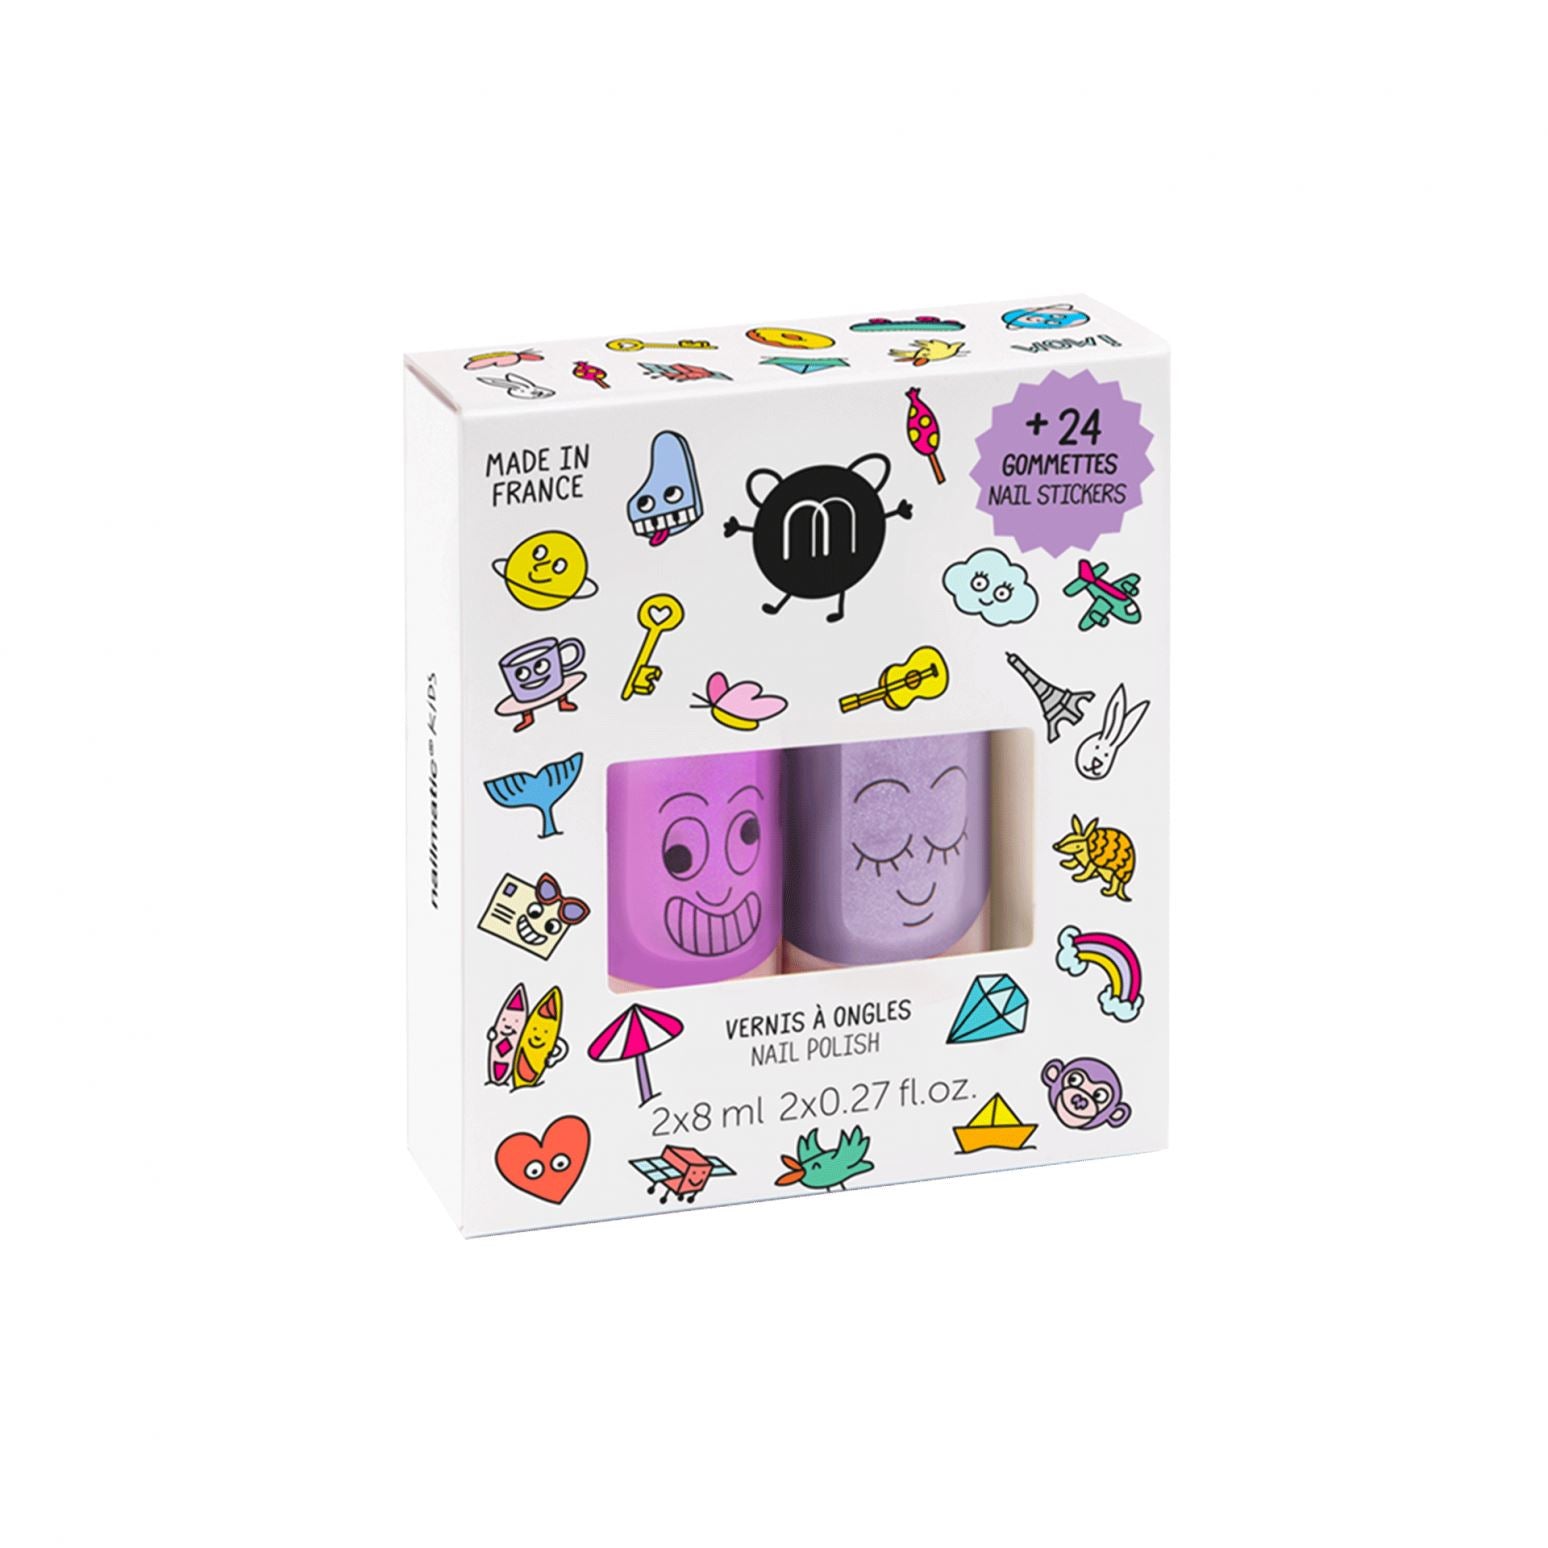 coffret wow 2 vernis + stickers pour ongles - Nailmatic 202wow 3760229898495